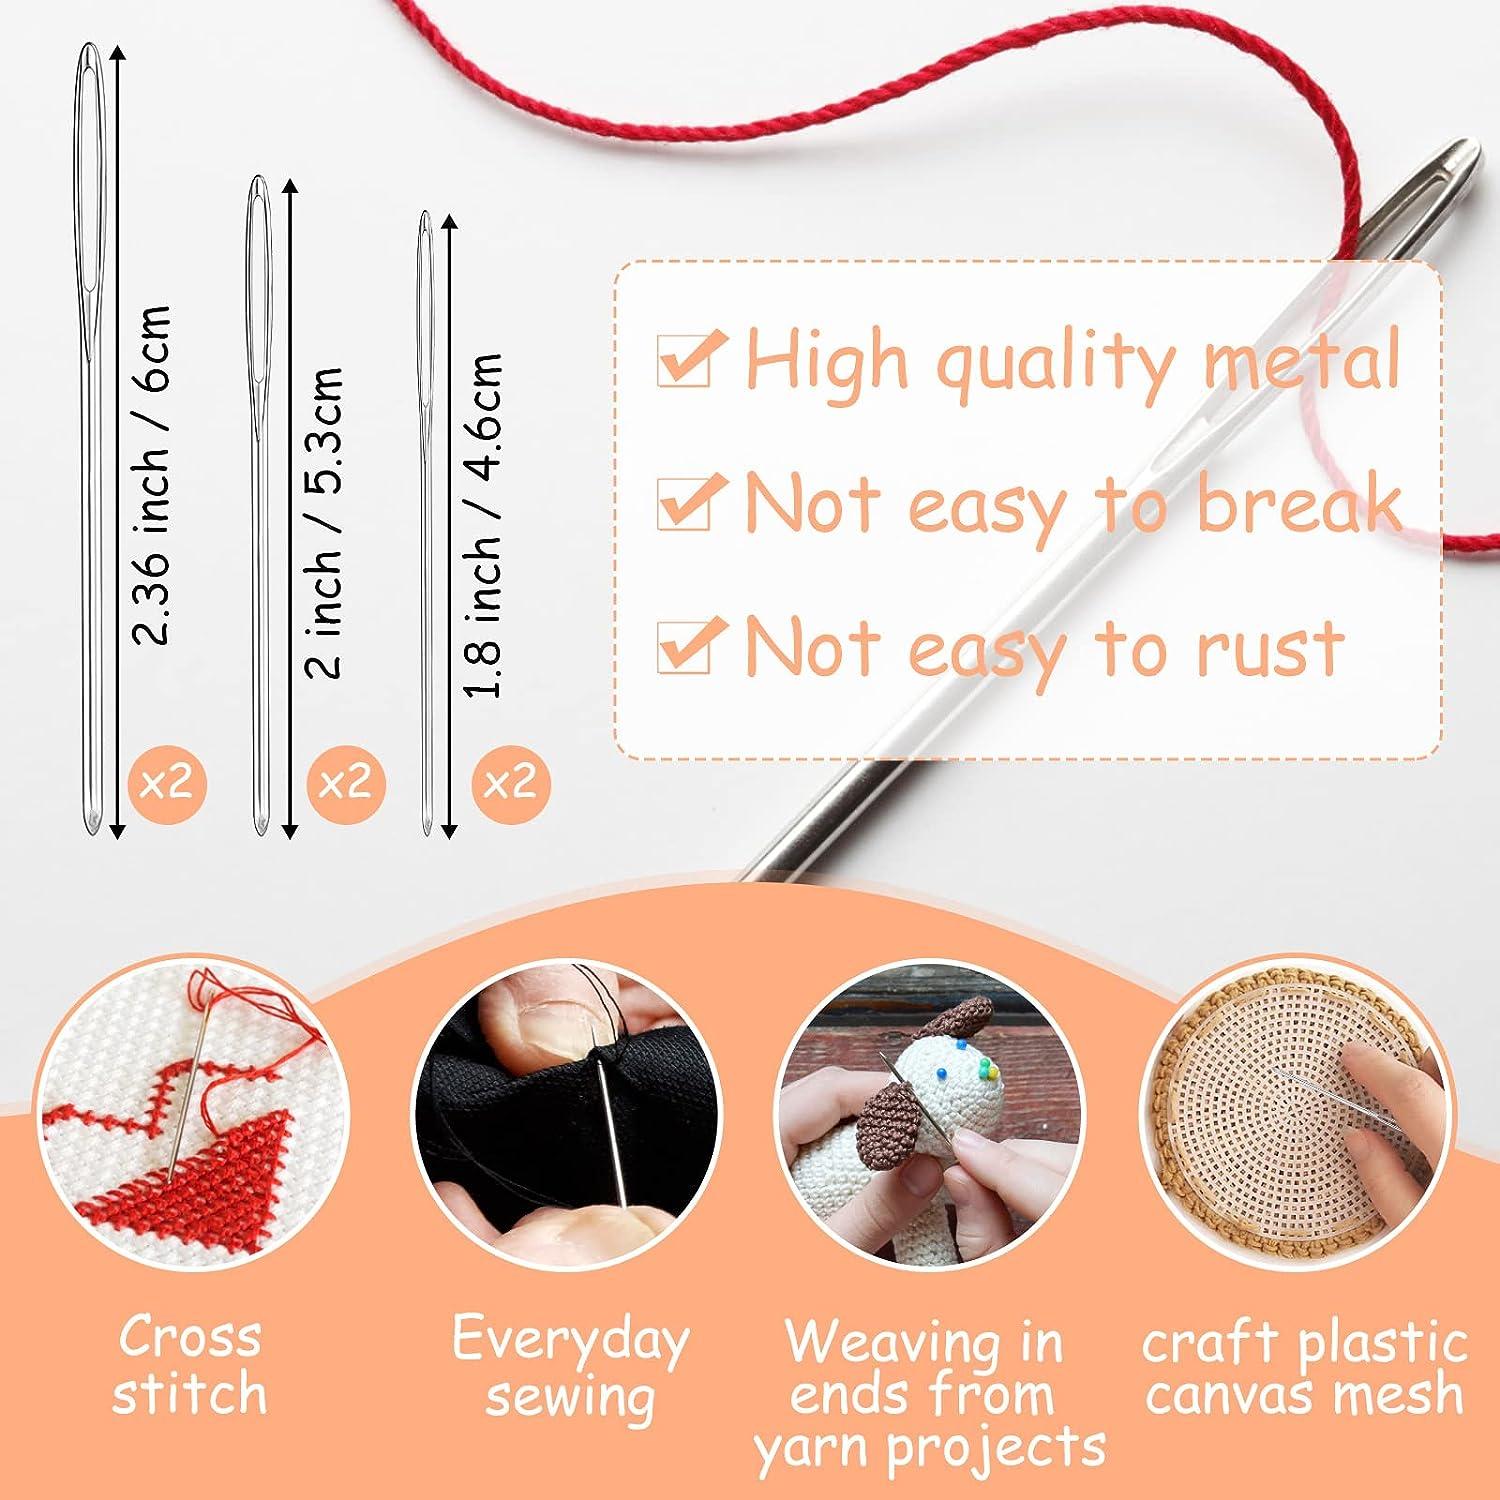 43 PCS Yarn Needle Set, Darning Needles for Crocheting Tapestry Needle  Crochet Sewing Needle, Big Eye Blunt Knitting Needles with Stitch Markers  for